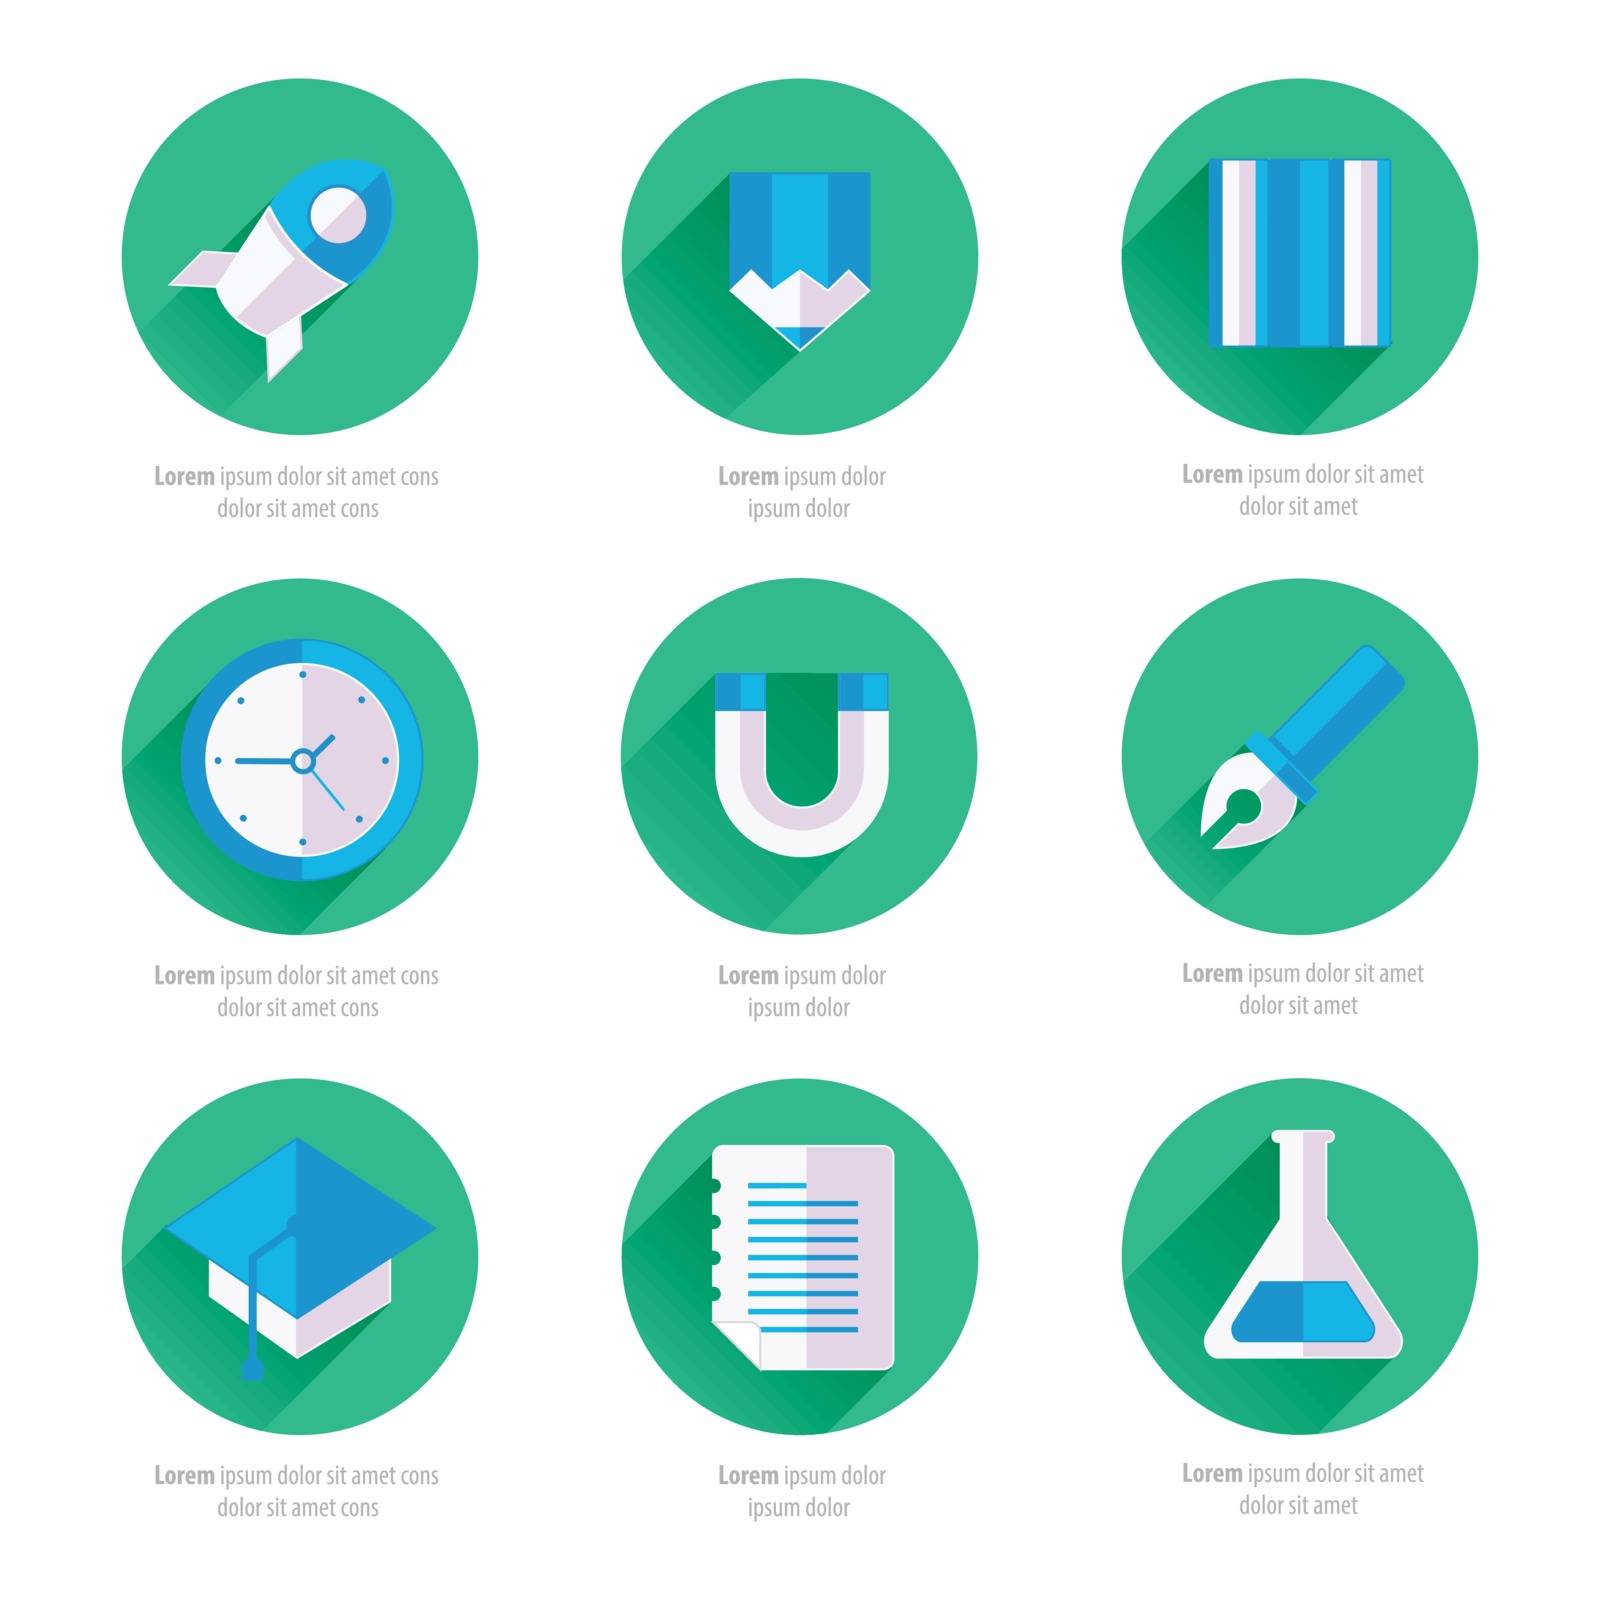 
Set of vector flat design icons with long shadows